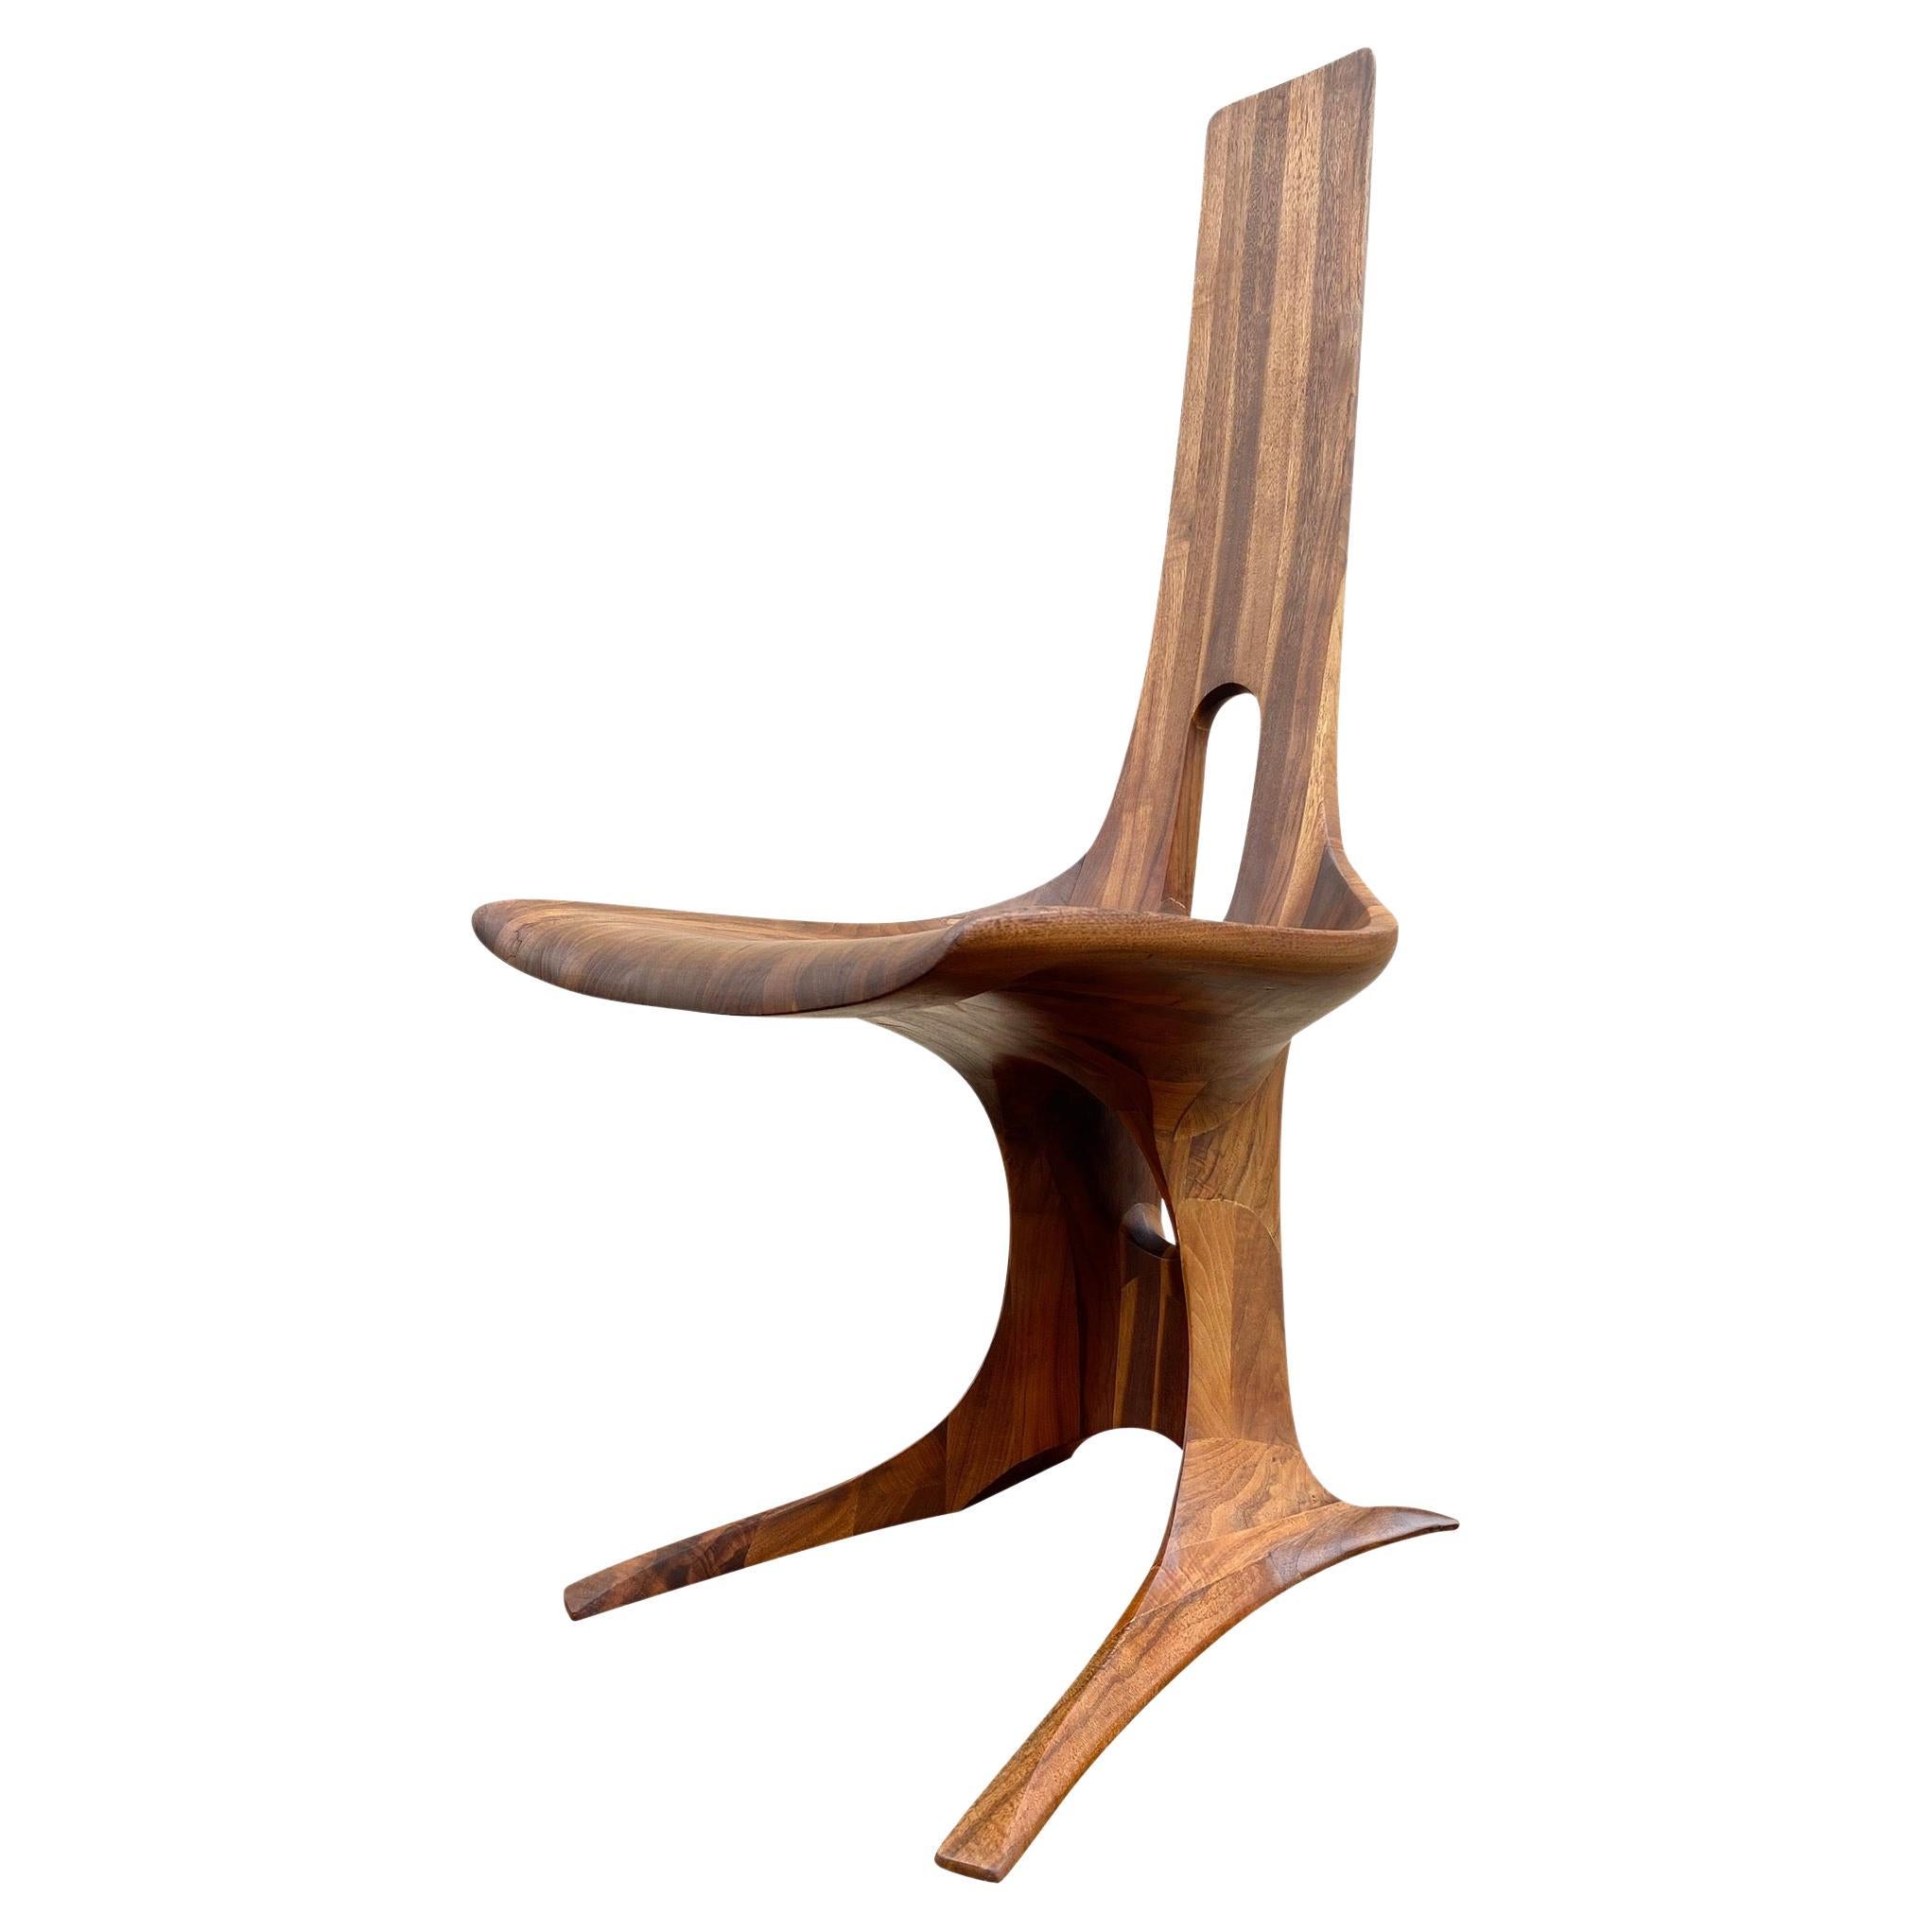 Modernist Sculptural Walnut Chair by Edward G. Livingston for Archotypo (1970) For Sale